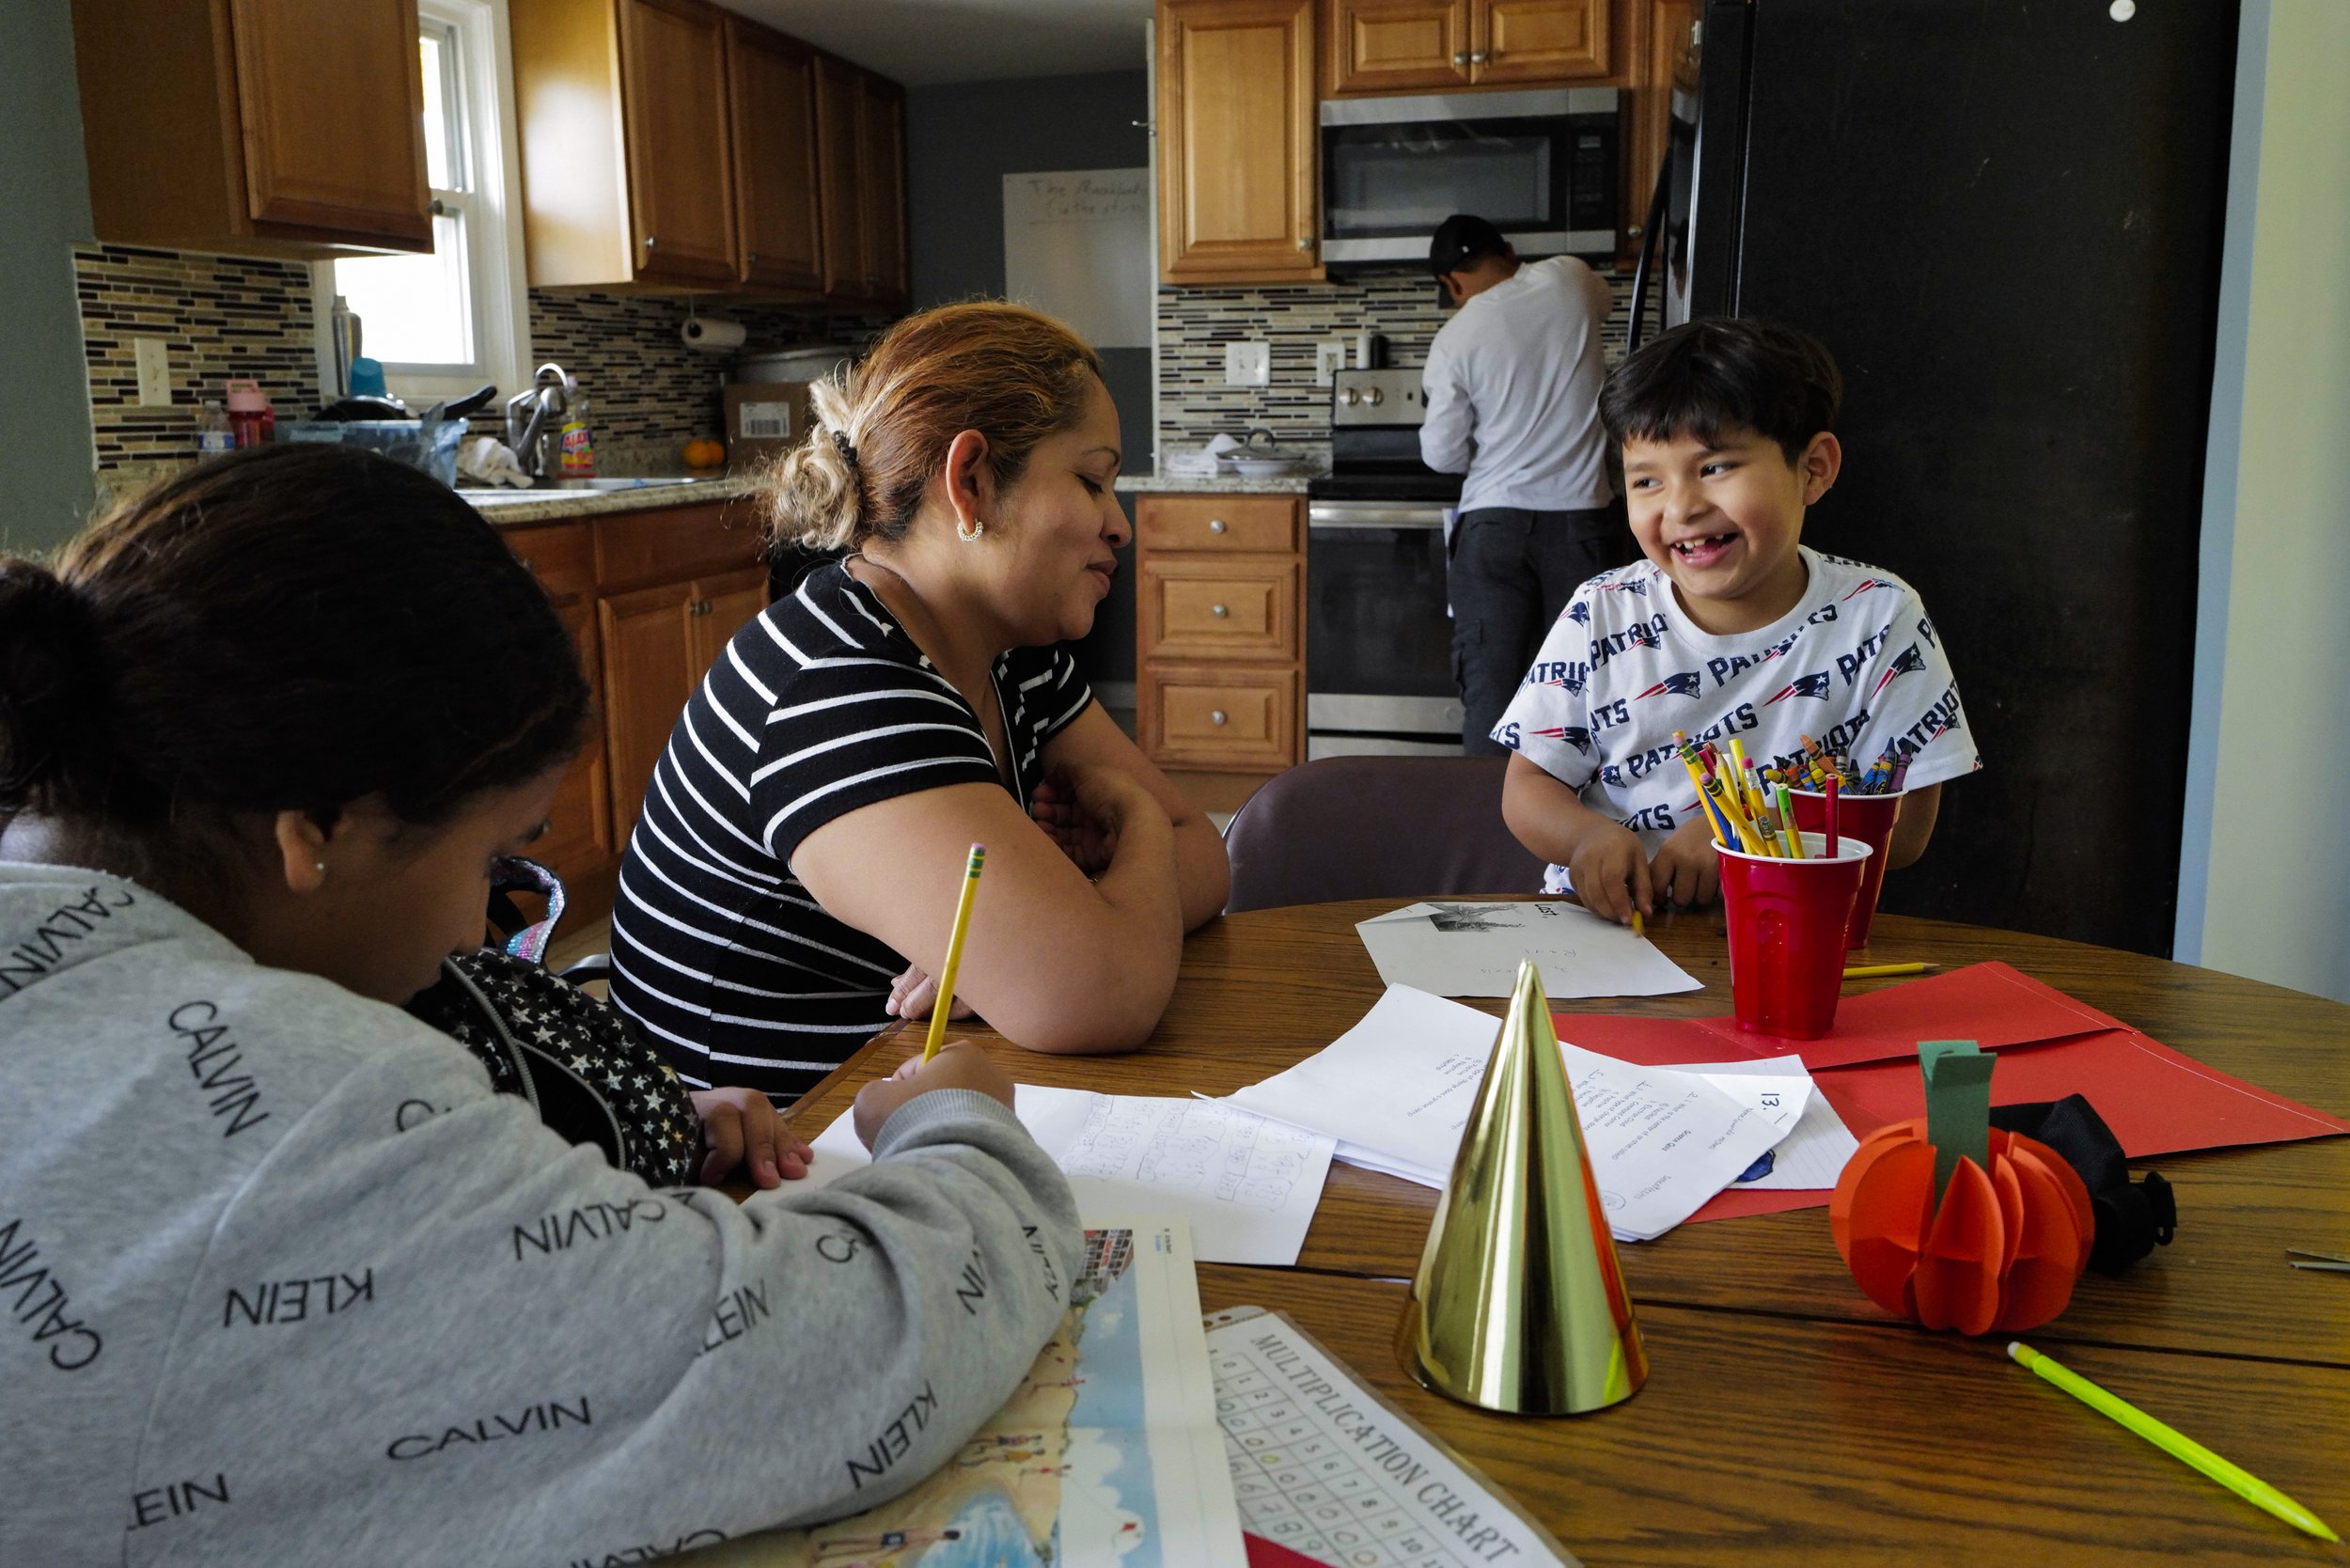  (From left) Manuel’s daughter Fernanda Aimee, 12, Teresa and her son Raul Alexis, 6, work on schoolwork together while Manuel cooks rice and beans in the kitchen of their new apartment in Somerville, Mass. on Sept. 30, 2022.  